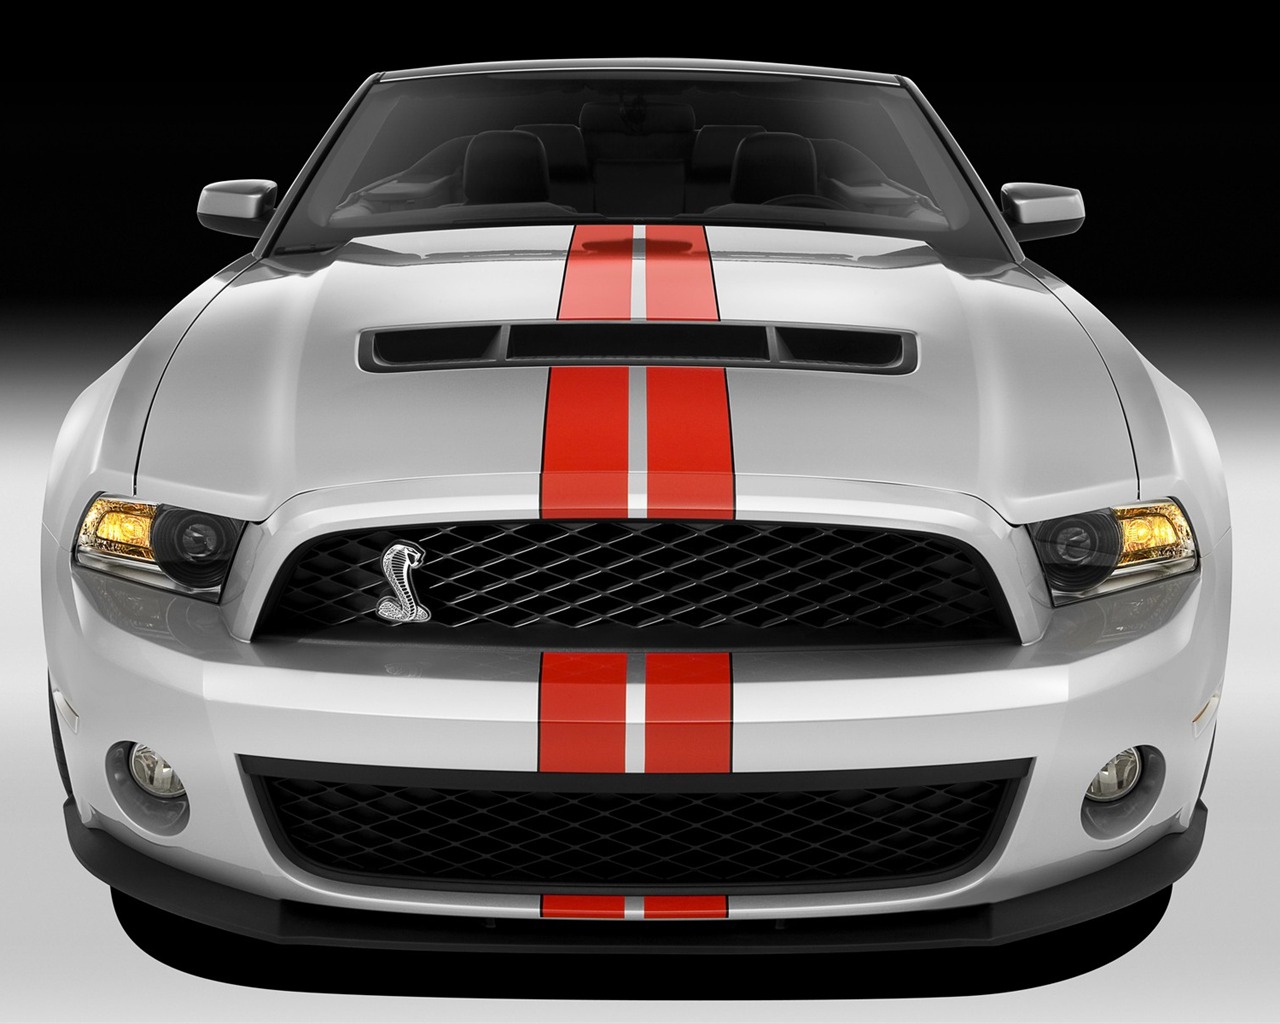 Ford Mustang GT500 Wallpapers #3 - 1280x1024